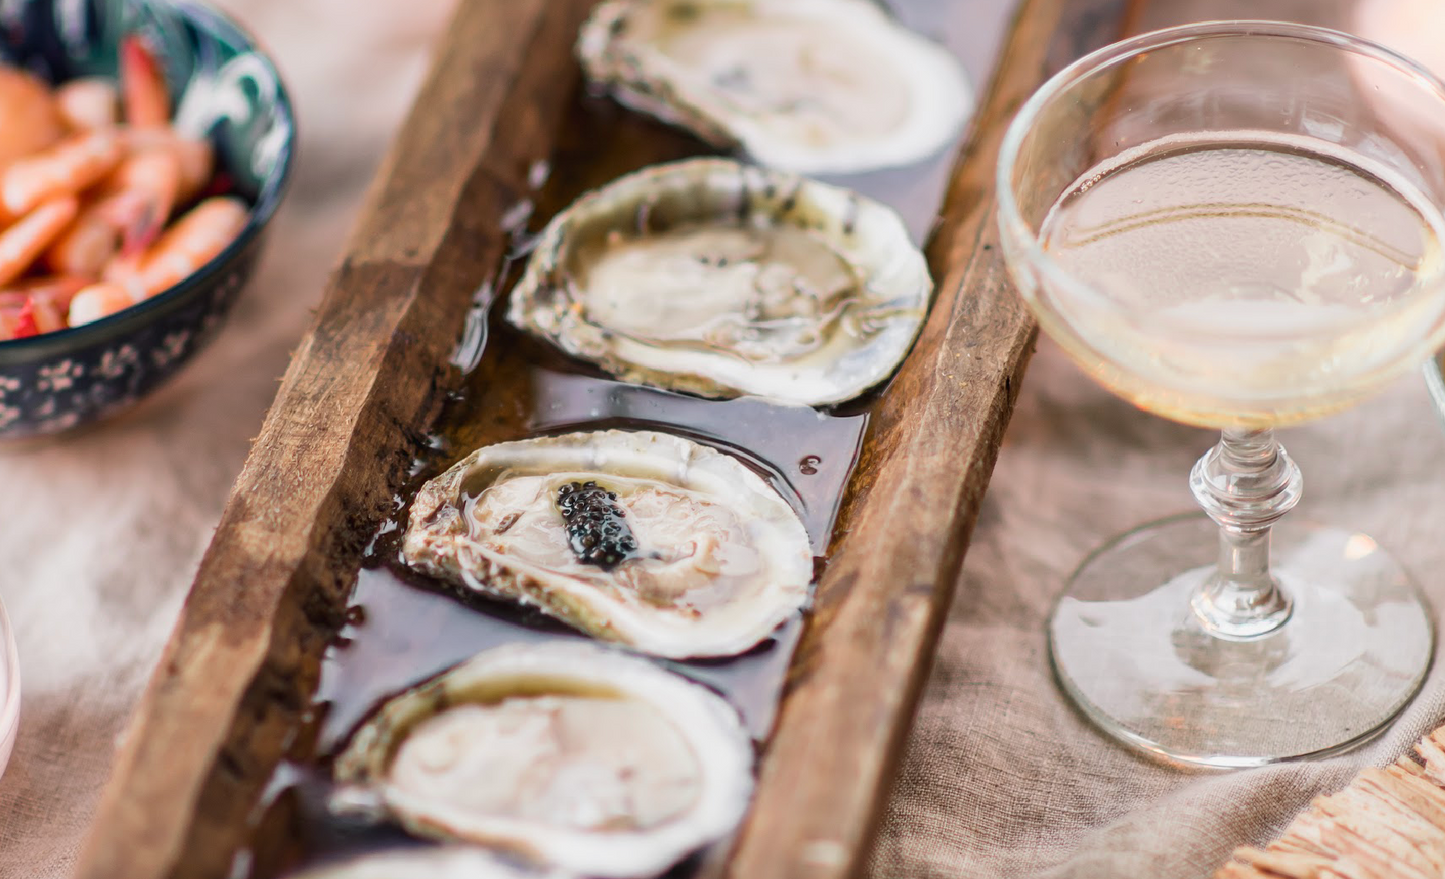 What Goes with Fresh Oysters? Our Top 7 Pairings Guaranteed to Delight!